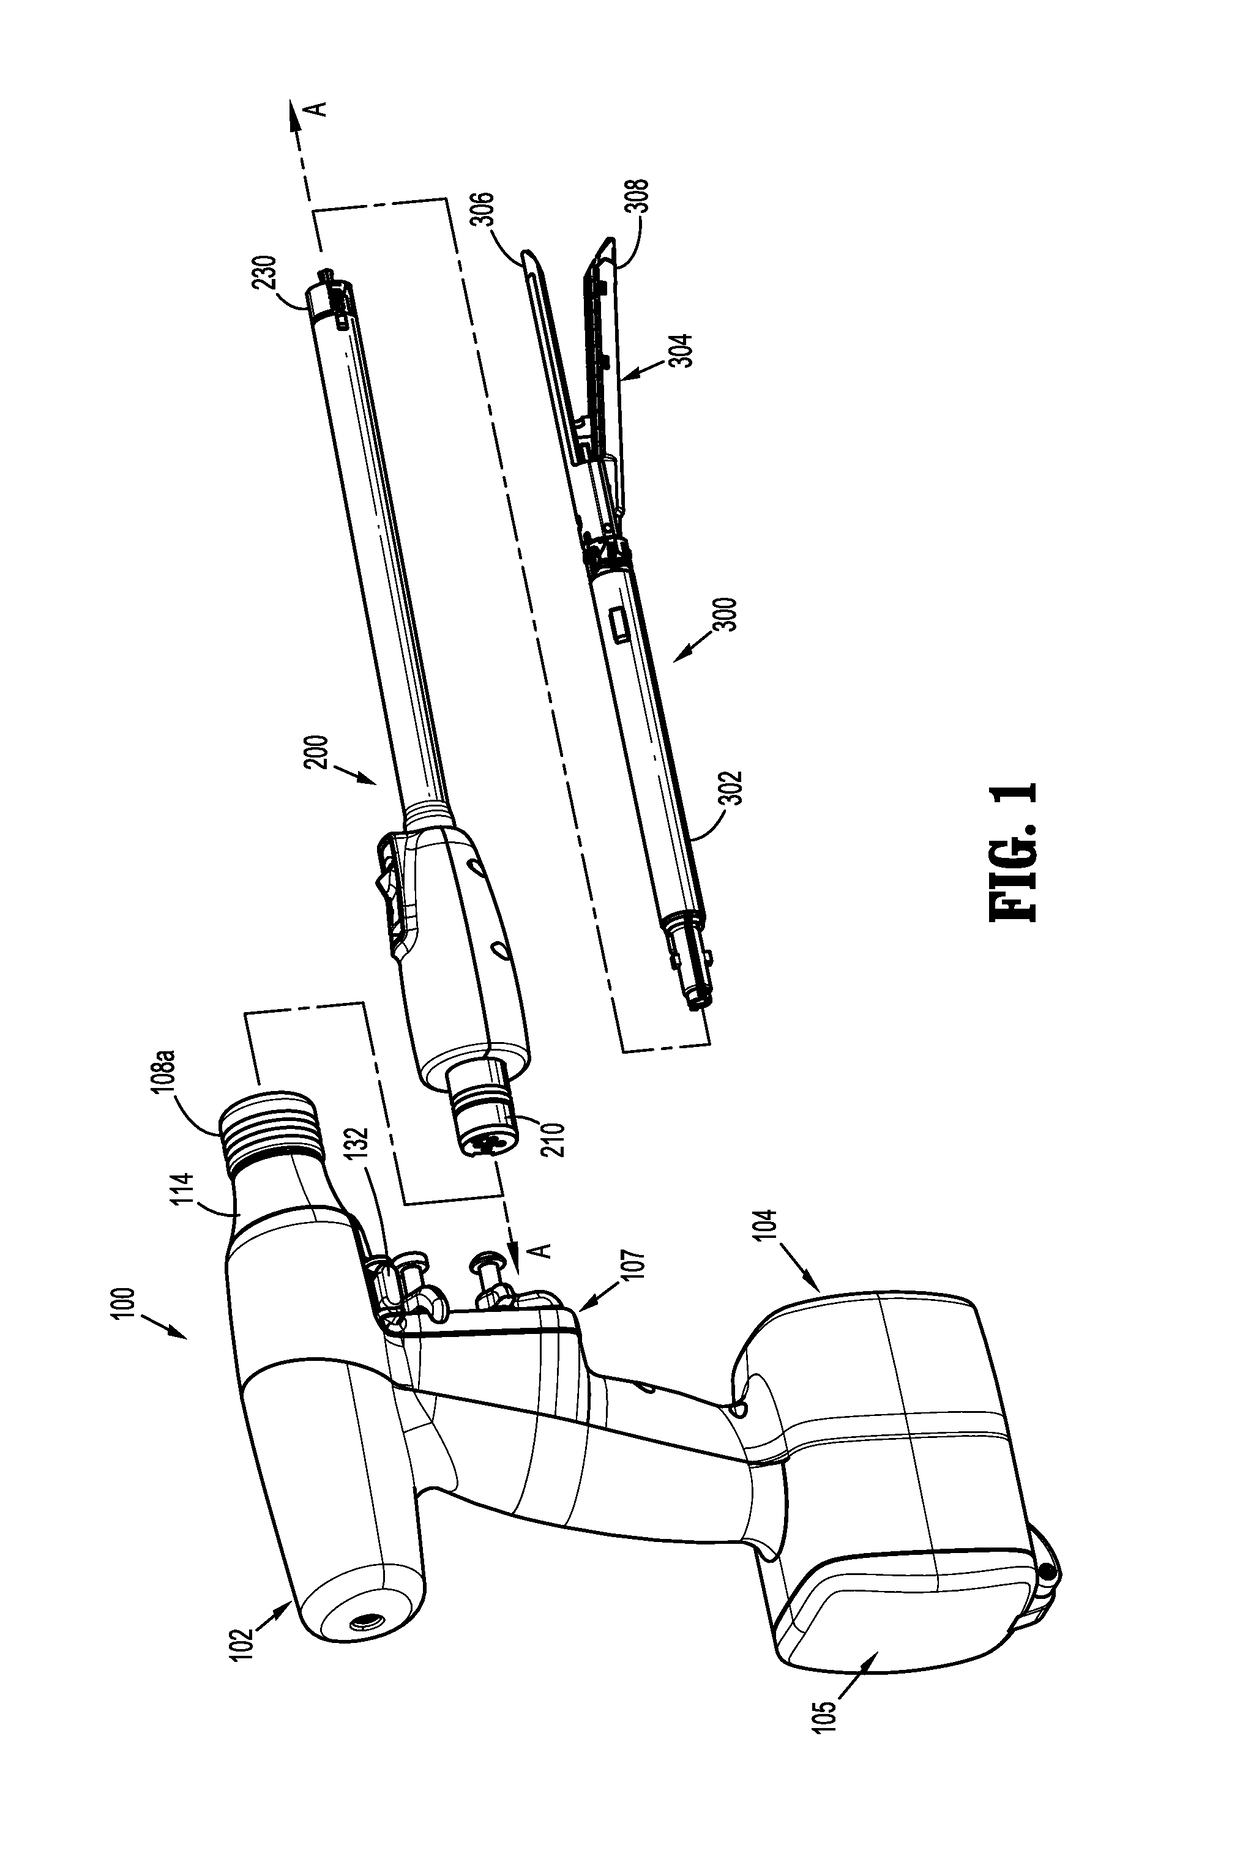 Handheld surgical handle assembly, surgical adapters for use between surgical handle assembly and surgical end effectors, and methods of use